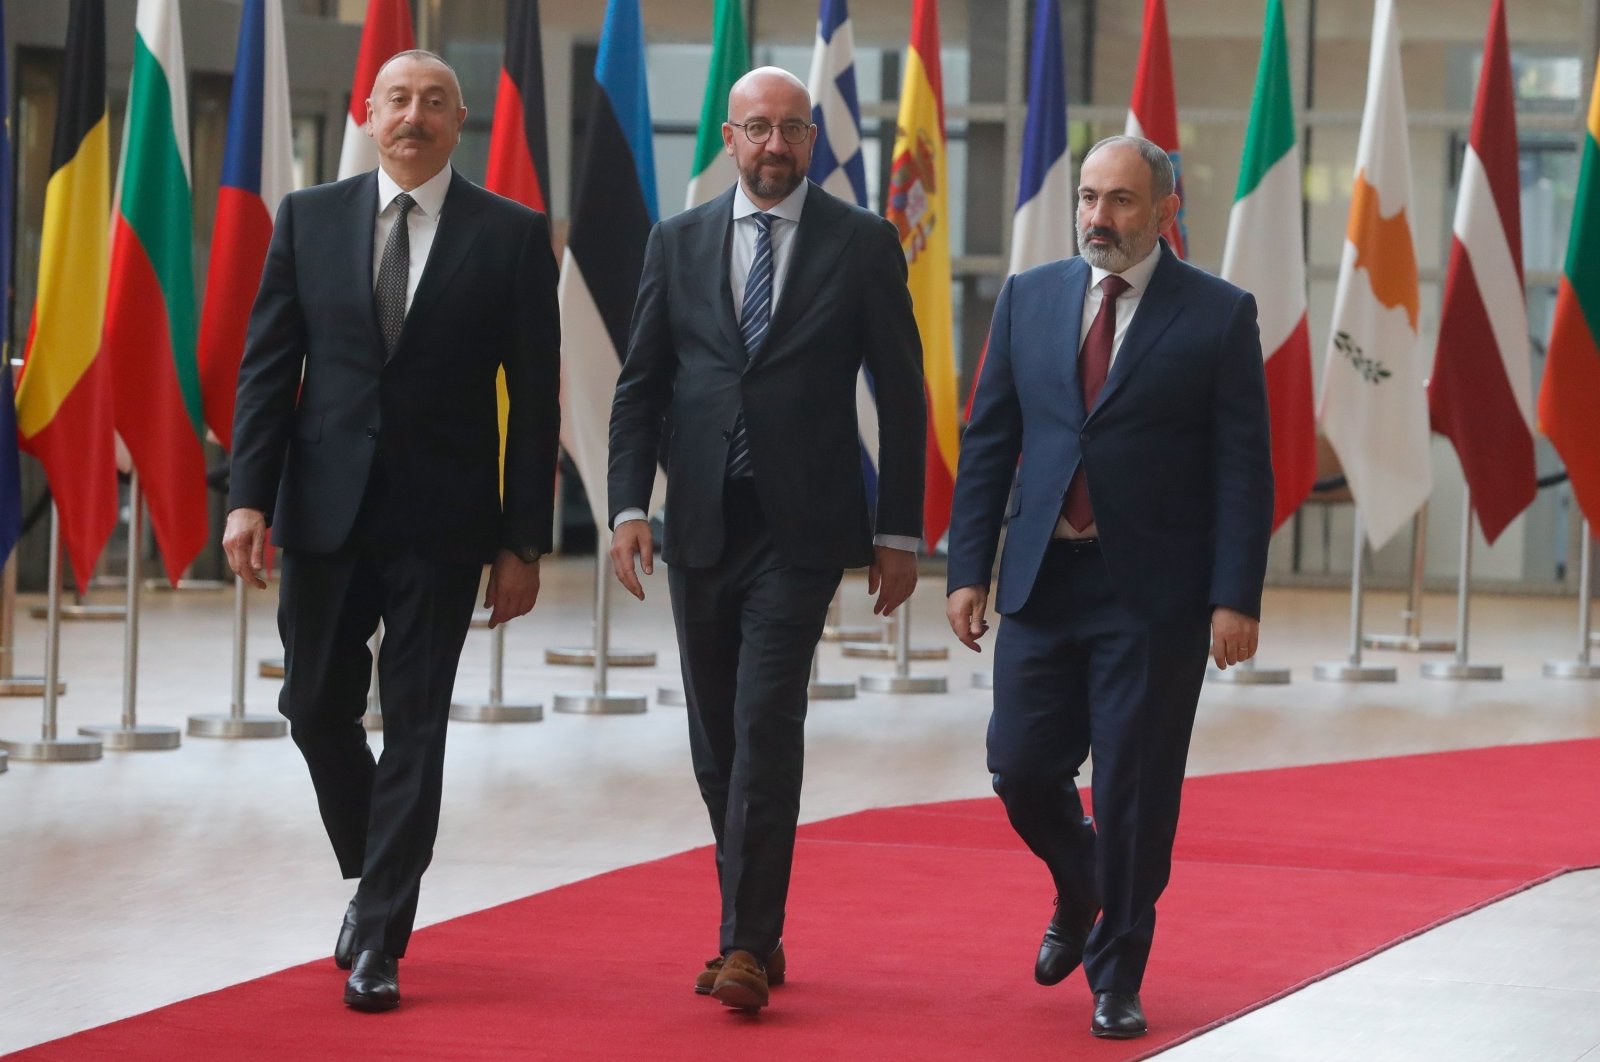 Azerbaijani President Ilham Aliyev (L) and Armenian Prime Minister Nikol Pashinian (R) are welcomed by European Council President Charles Michel (C) in Brussels, Belgium, May 22, 2022. (EPA Photo)